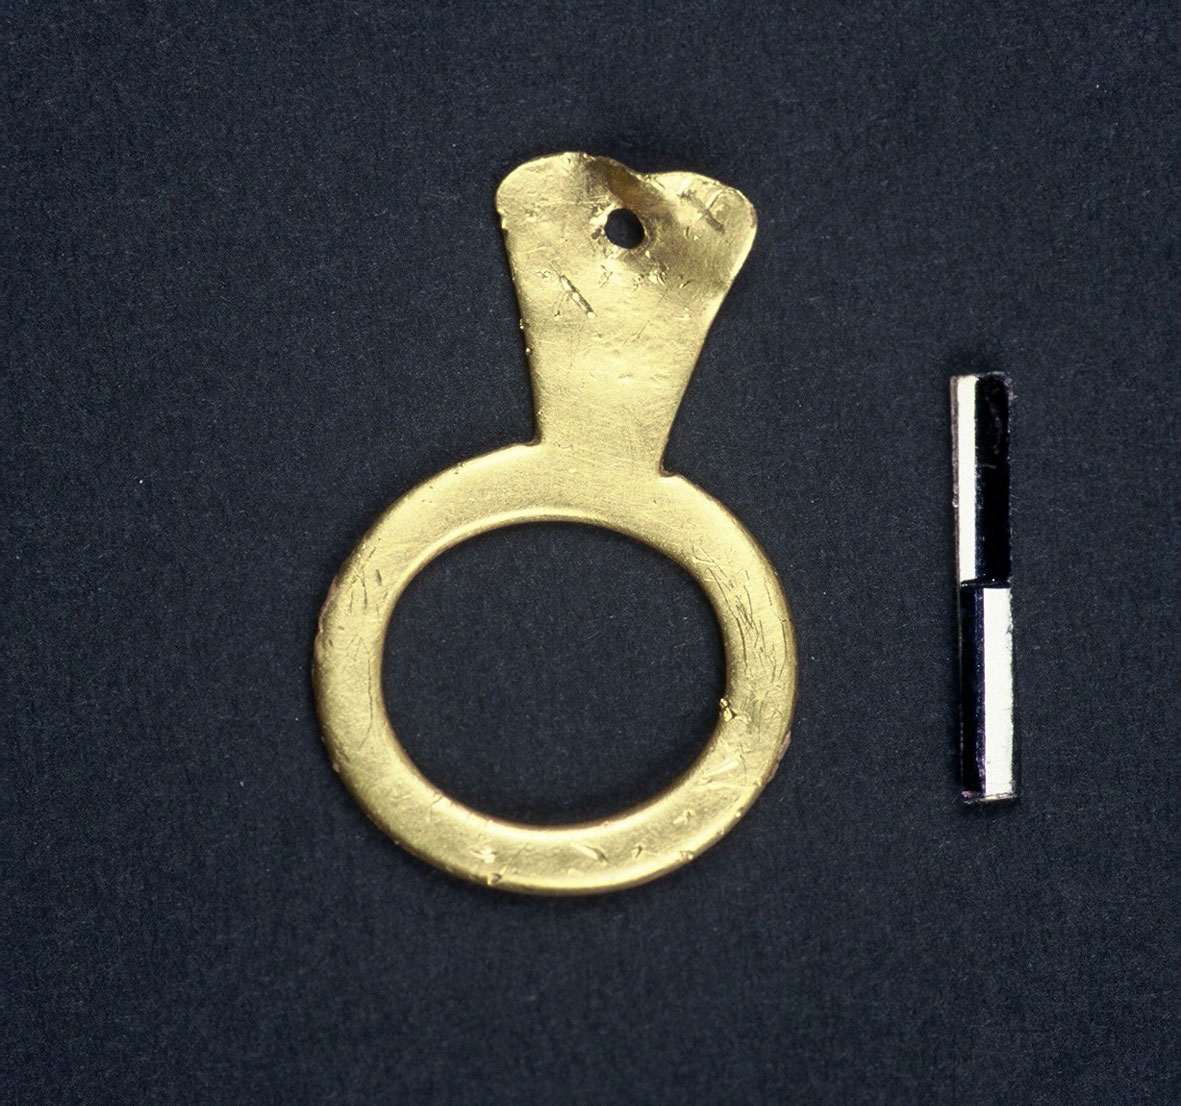 Fig. 38. Gold ring shaped ornament, probably conveys schematically the human form. Chalcolithic period.